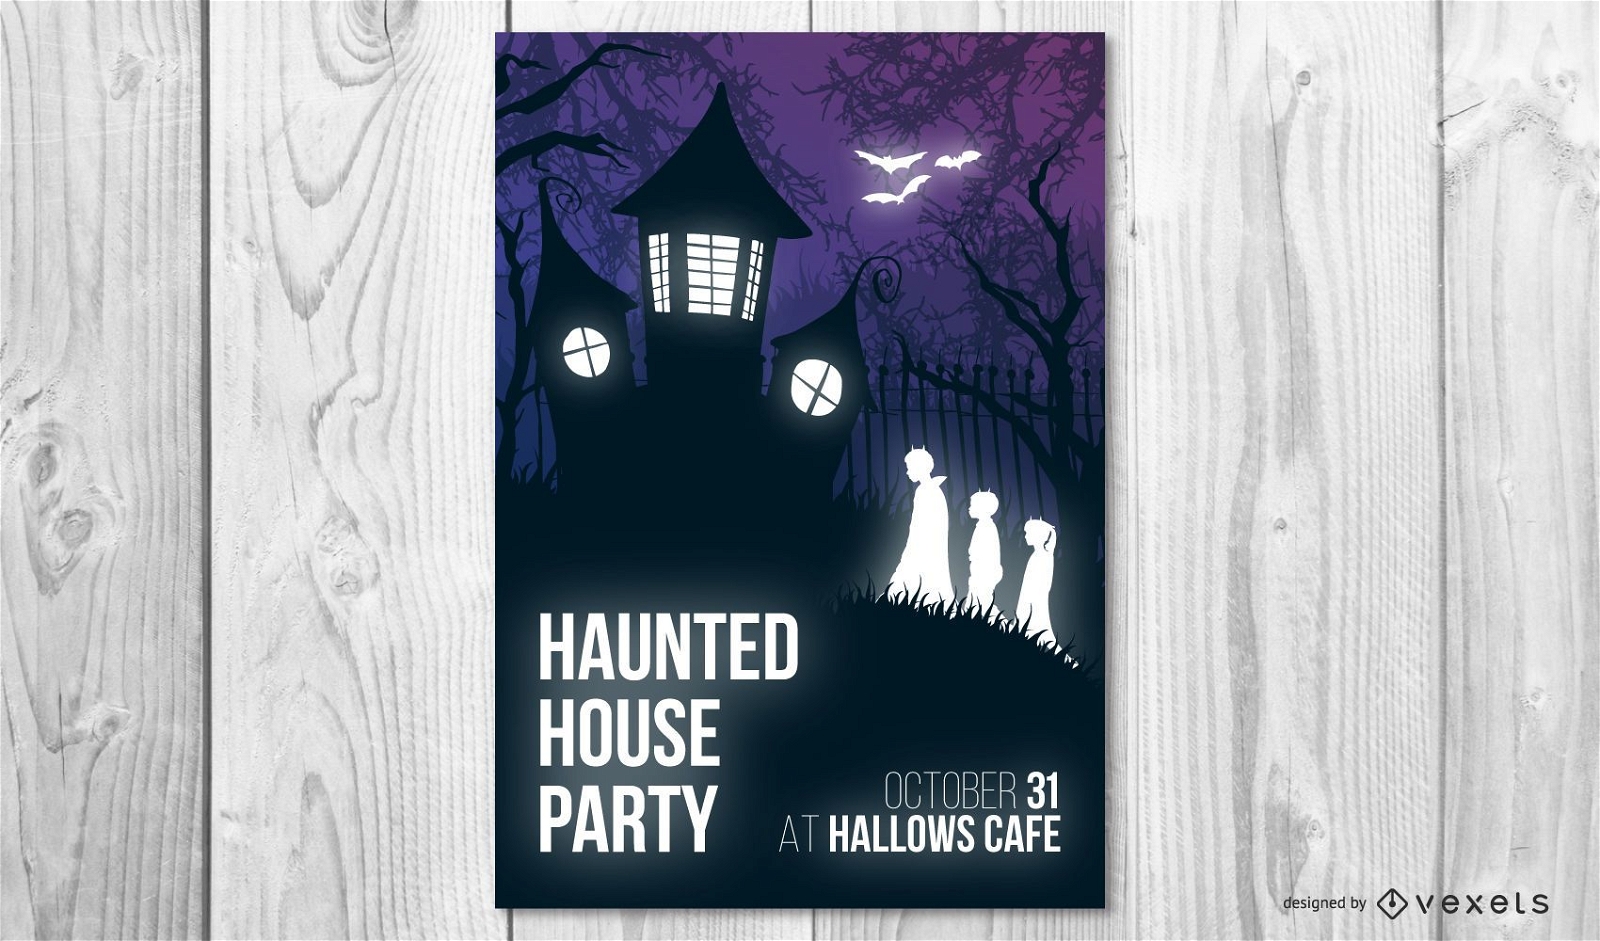 Haunted house party halloween poster